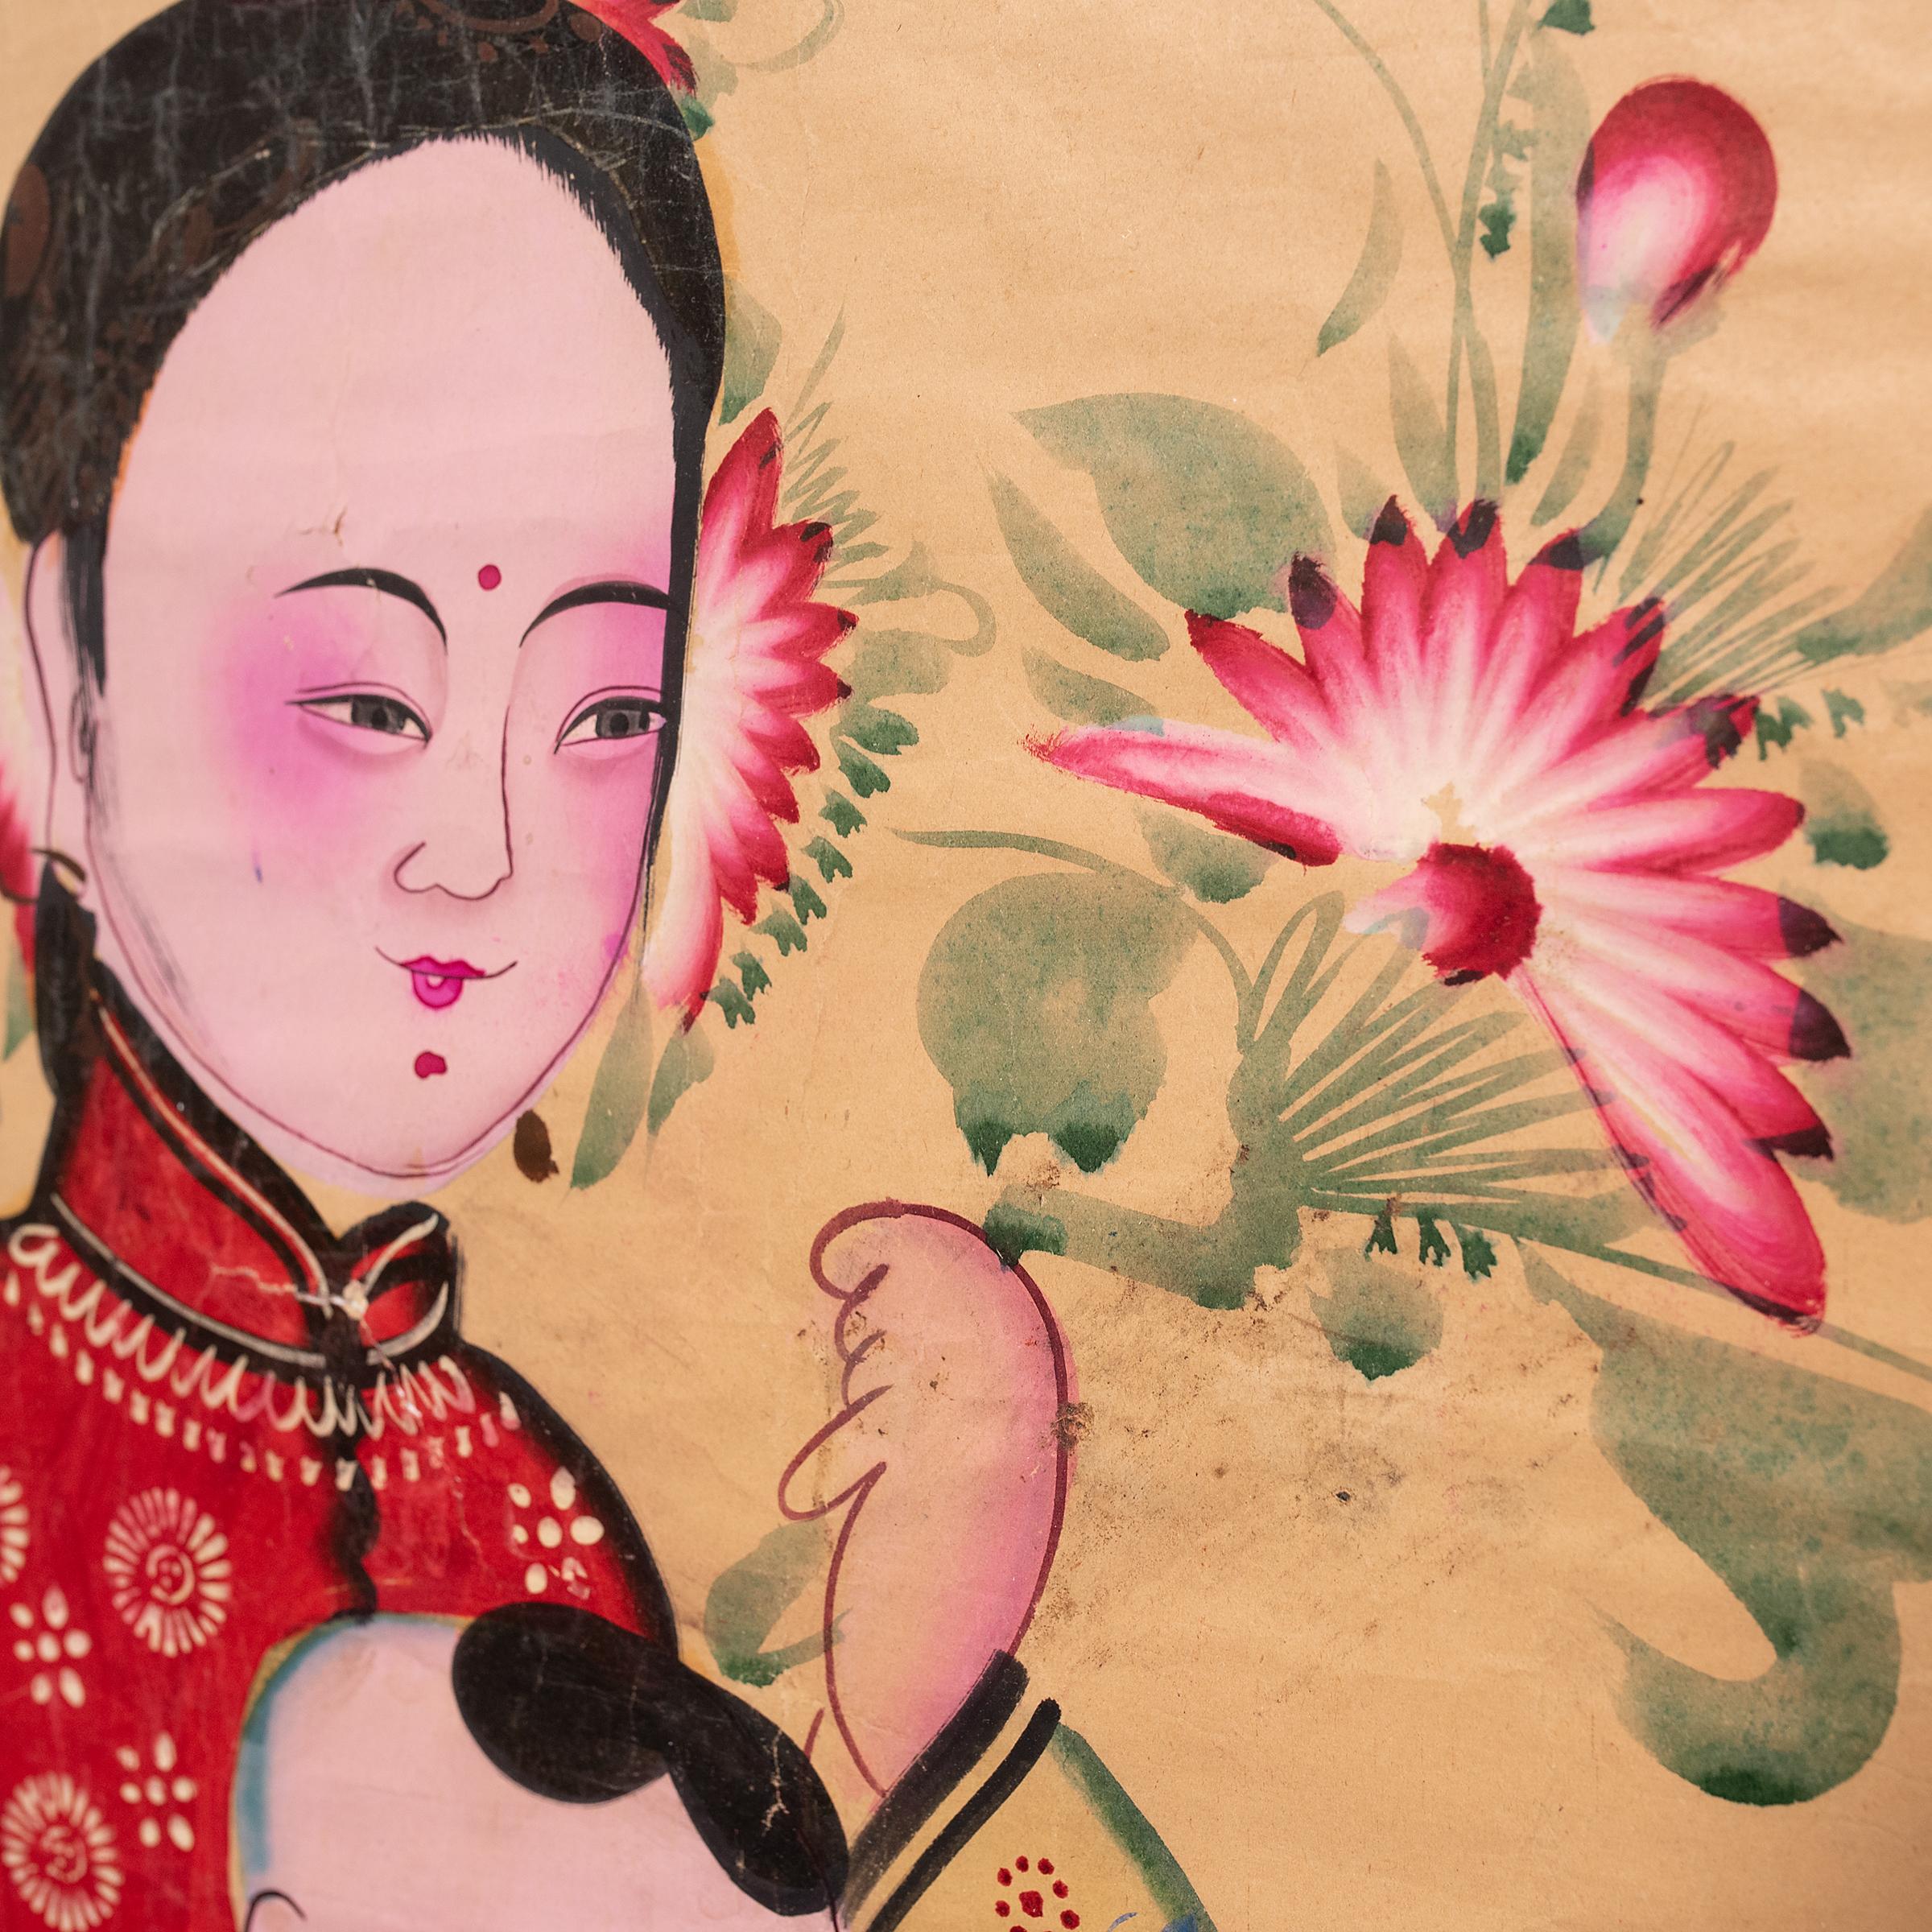 Chinese New Year paintings (nian hua) are colorful folk paintings created to celebrate the annual Spring Festival. Drawn or printed by folk artists in regional studios, nian hua paintings featured exaggerated characters with bright and contrasting